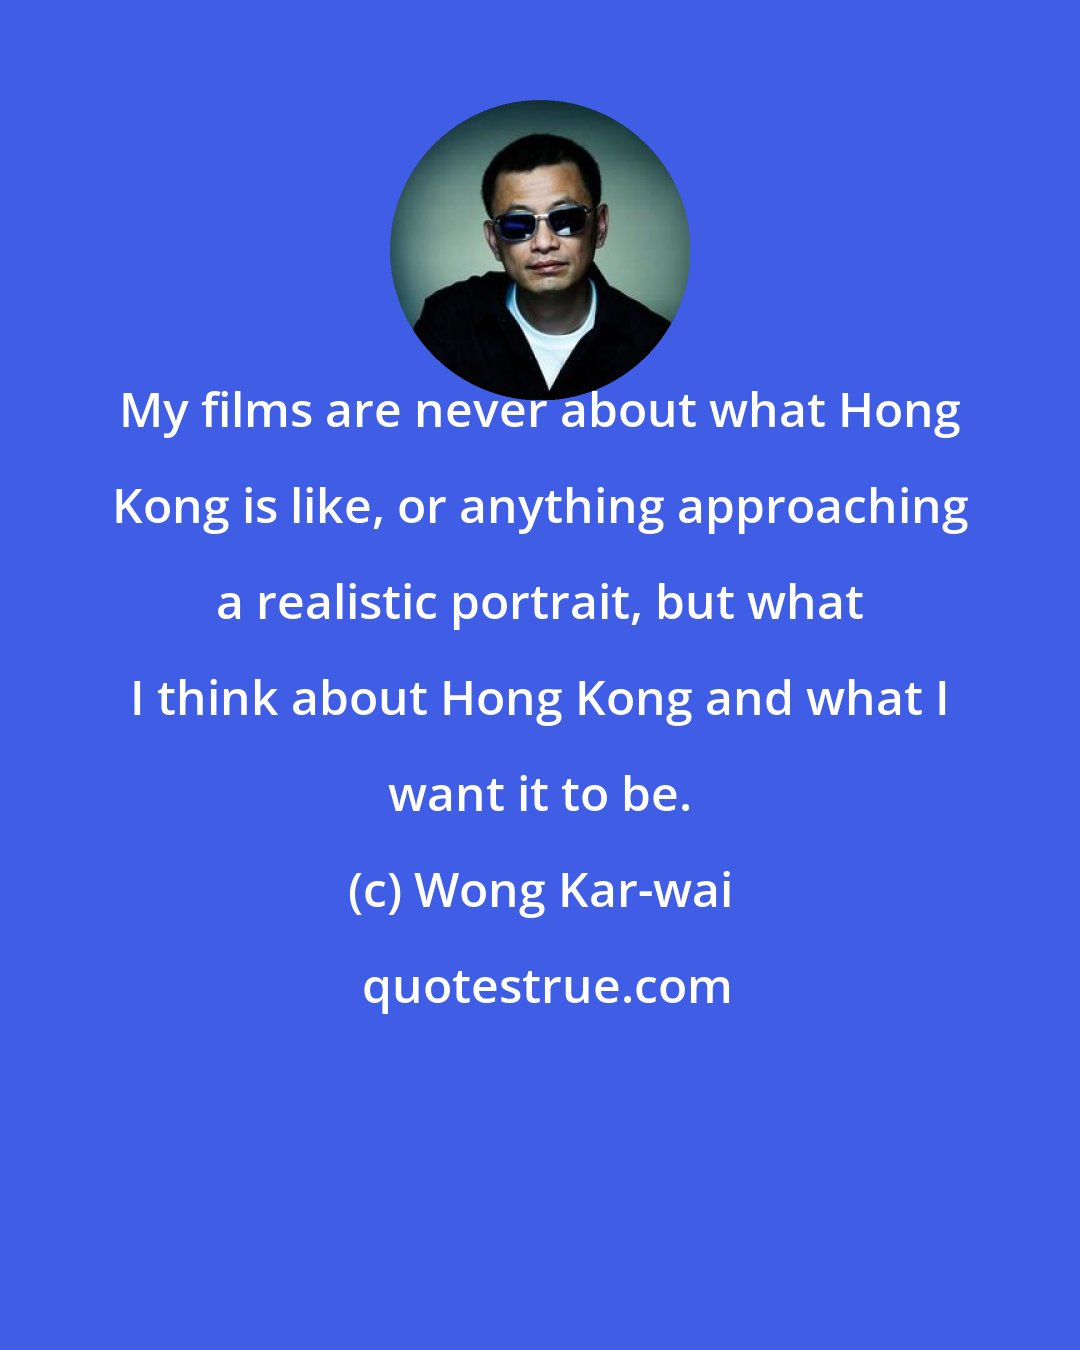 Wong Kar-wai: My films are never about what Hong Kong is like, or anything approaching a realistic portrait, but what I think about Hong Kong and what I want it to be.